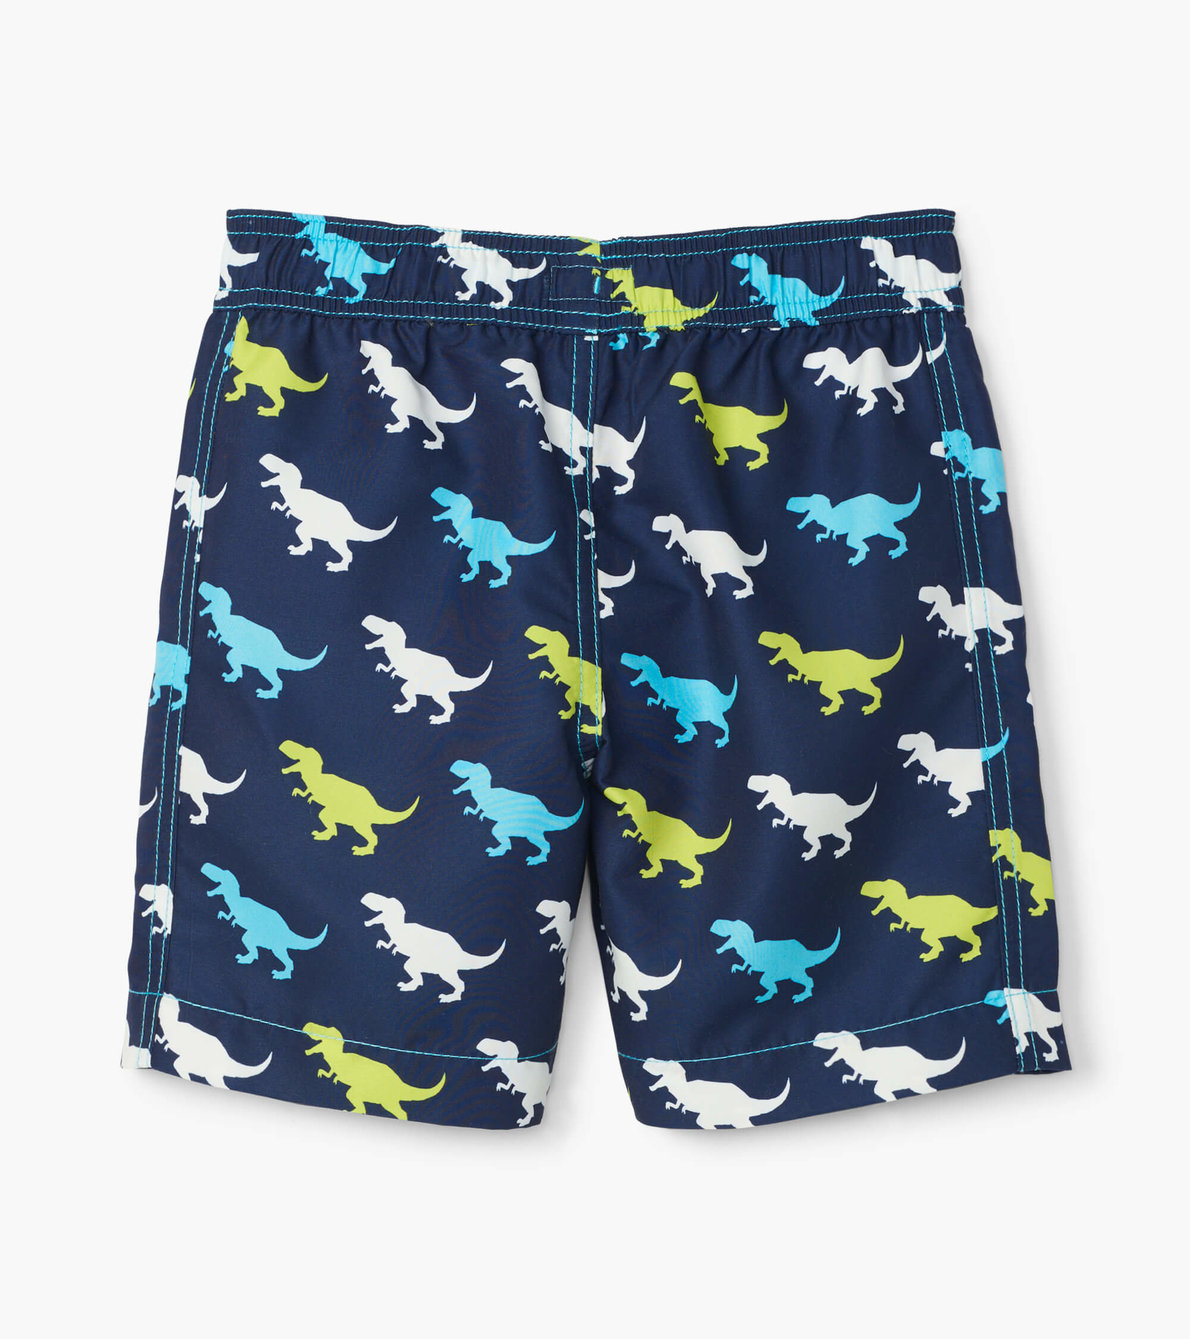 View larger image of T-Rex Silhouettes Swim Trunks